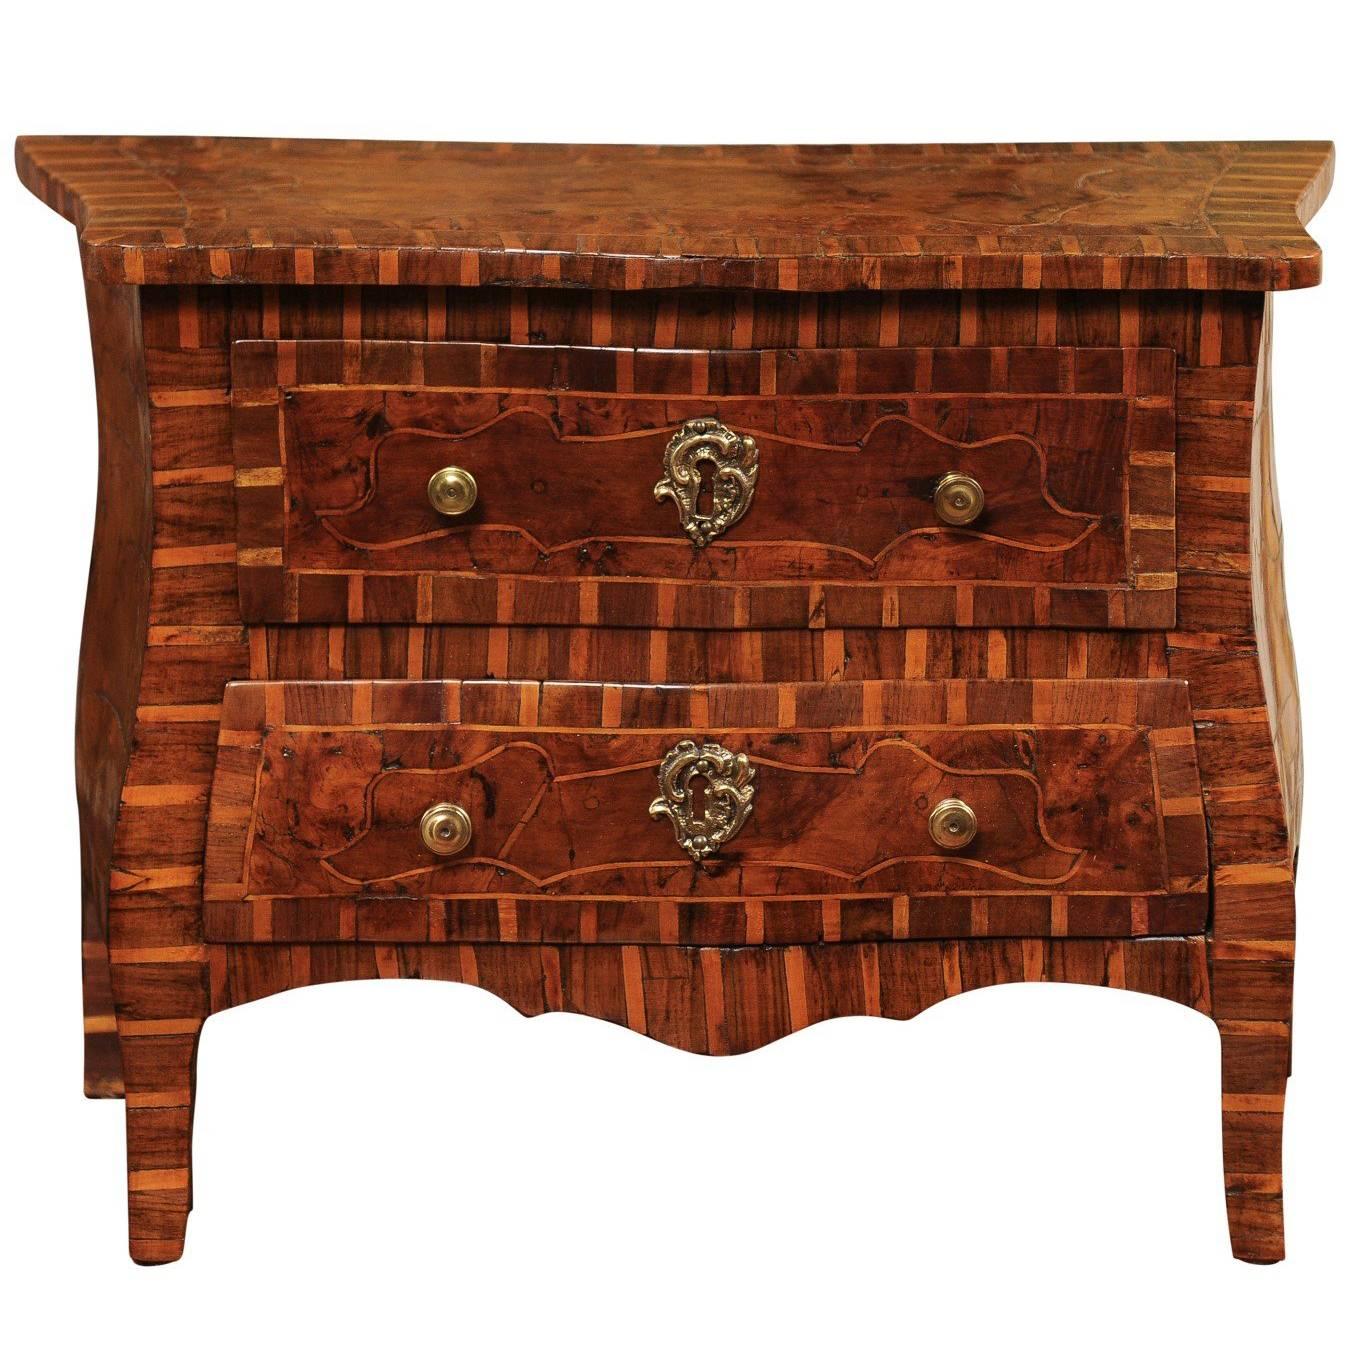 Early 19th Century Italian Inlaid Apprentice Commode in Fruitwood, Elm, & Walnut